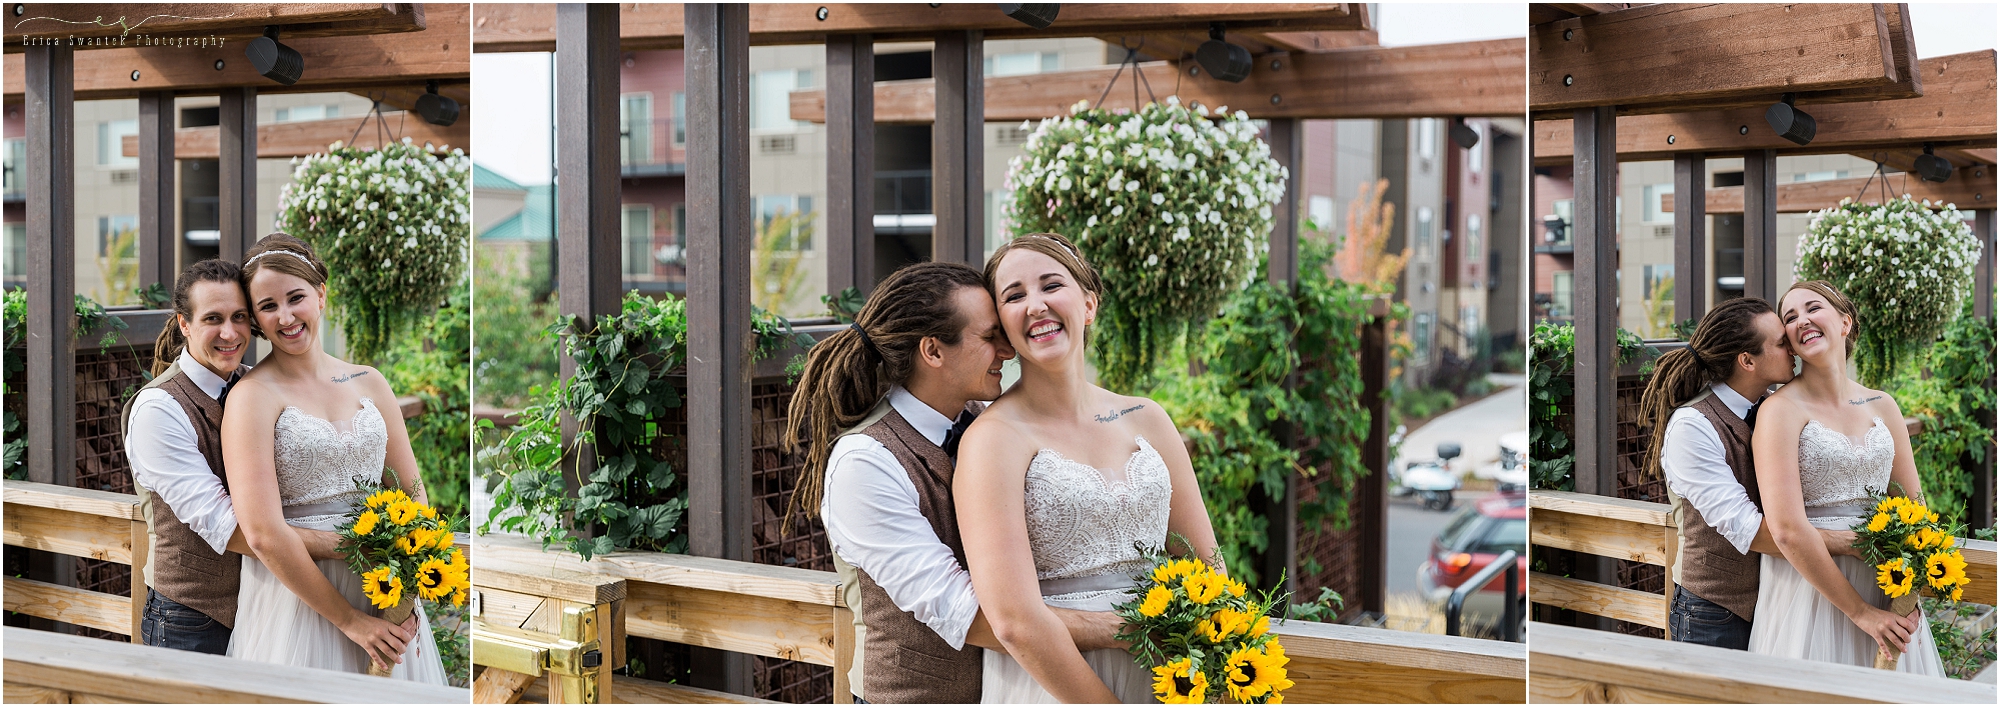 The wooden patio leading to the outside seating makes a perfect platform for romantic portraits at a Worthy Brewing Wedding in Bend Oregon. | Erica Swantek Photography